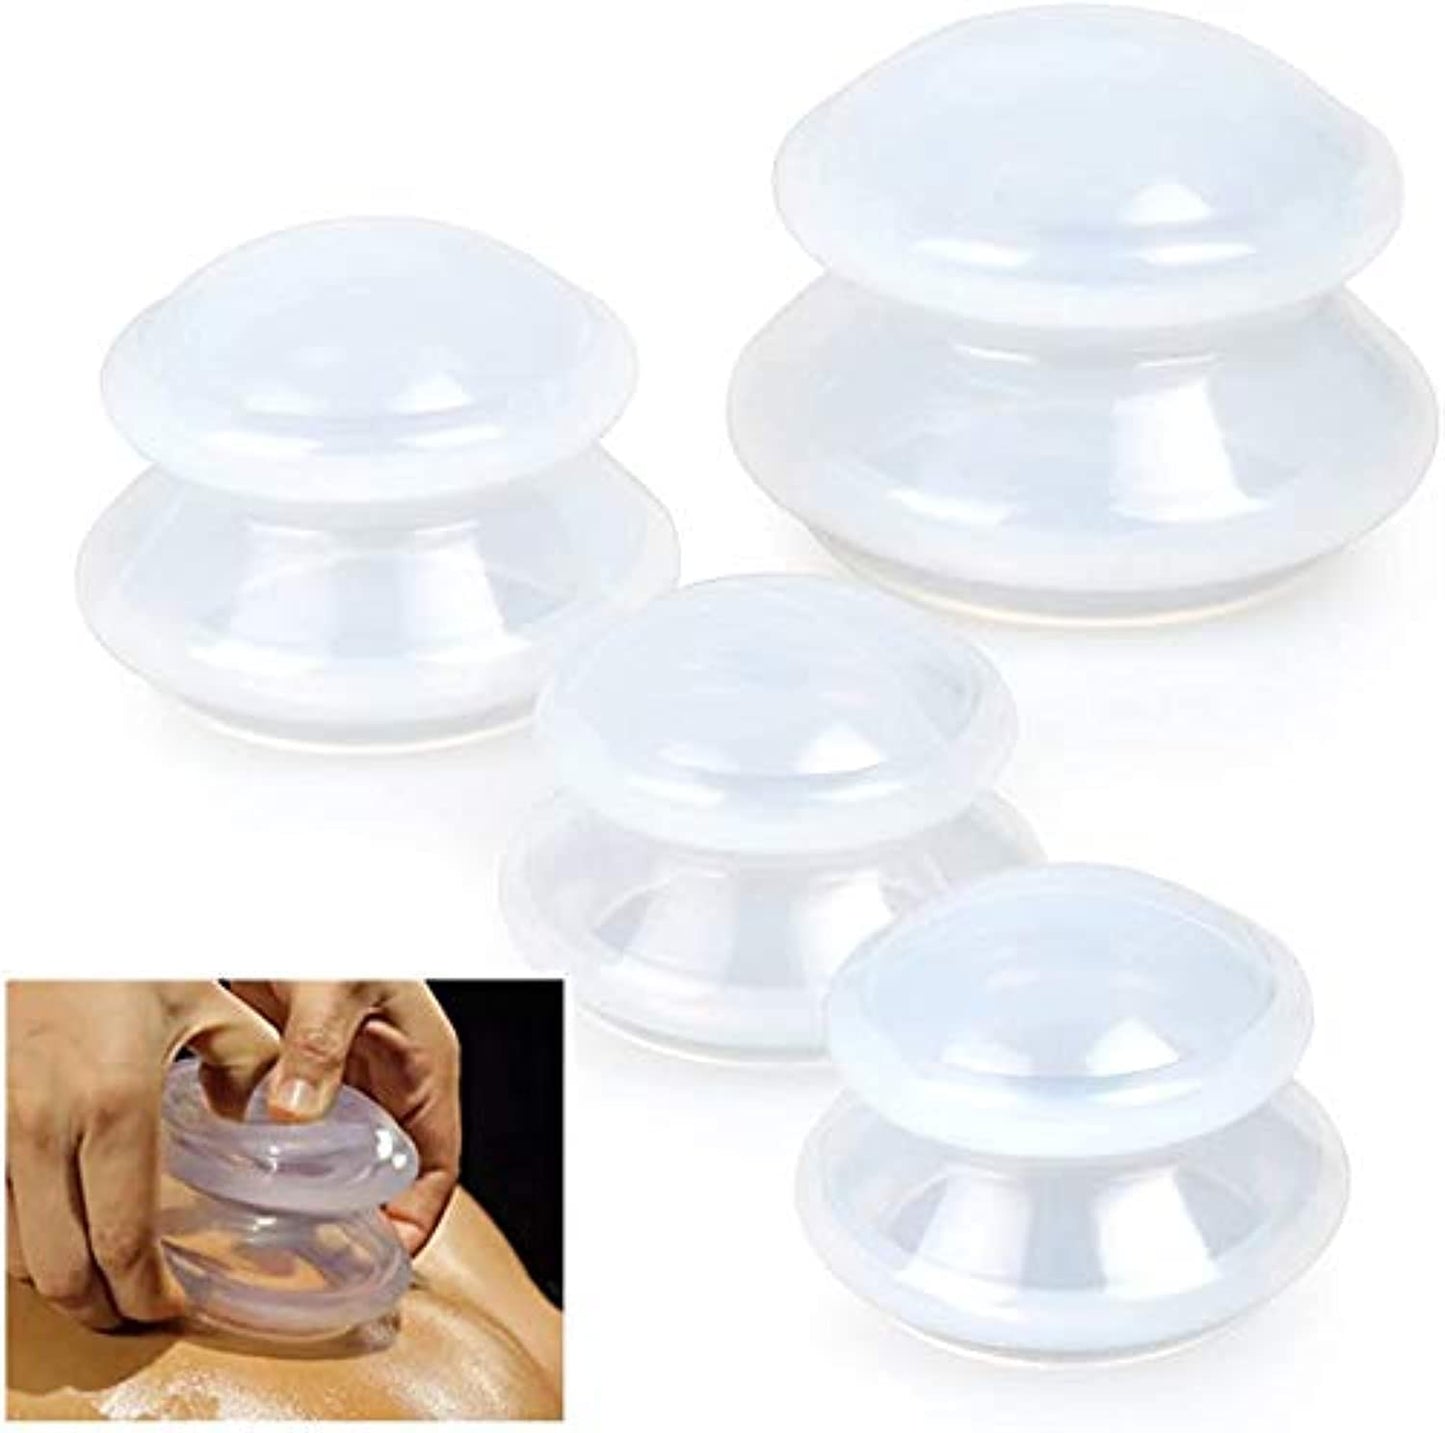 4 Sizes Advanced Cupping Therapy Sets, Silicone Vacuum Suction Cupping Cups for Muscle and Joint Pain Cellulite, etc